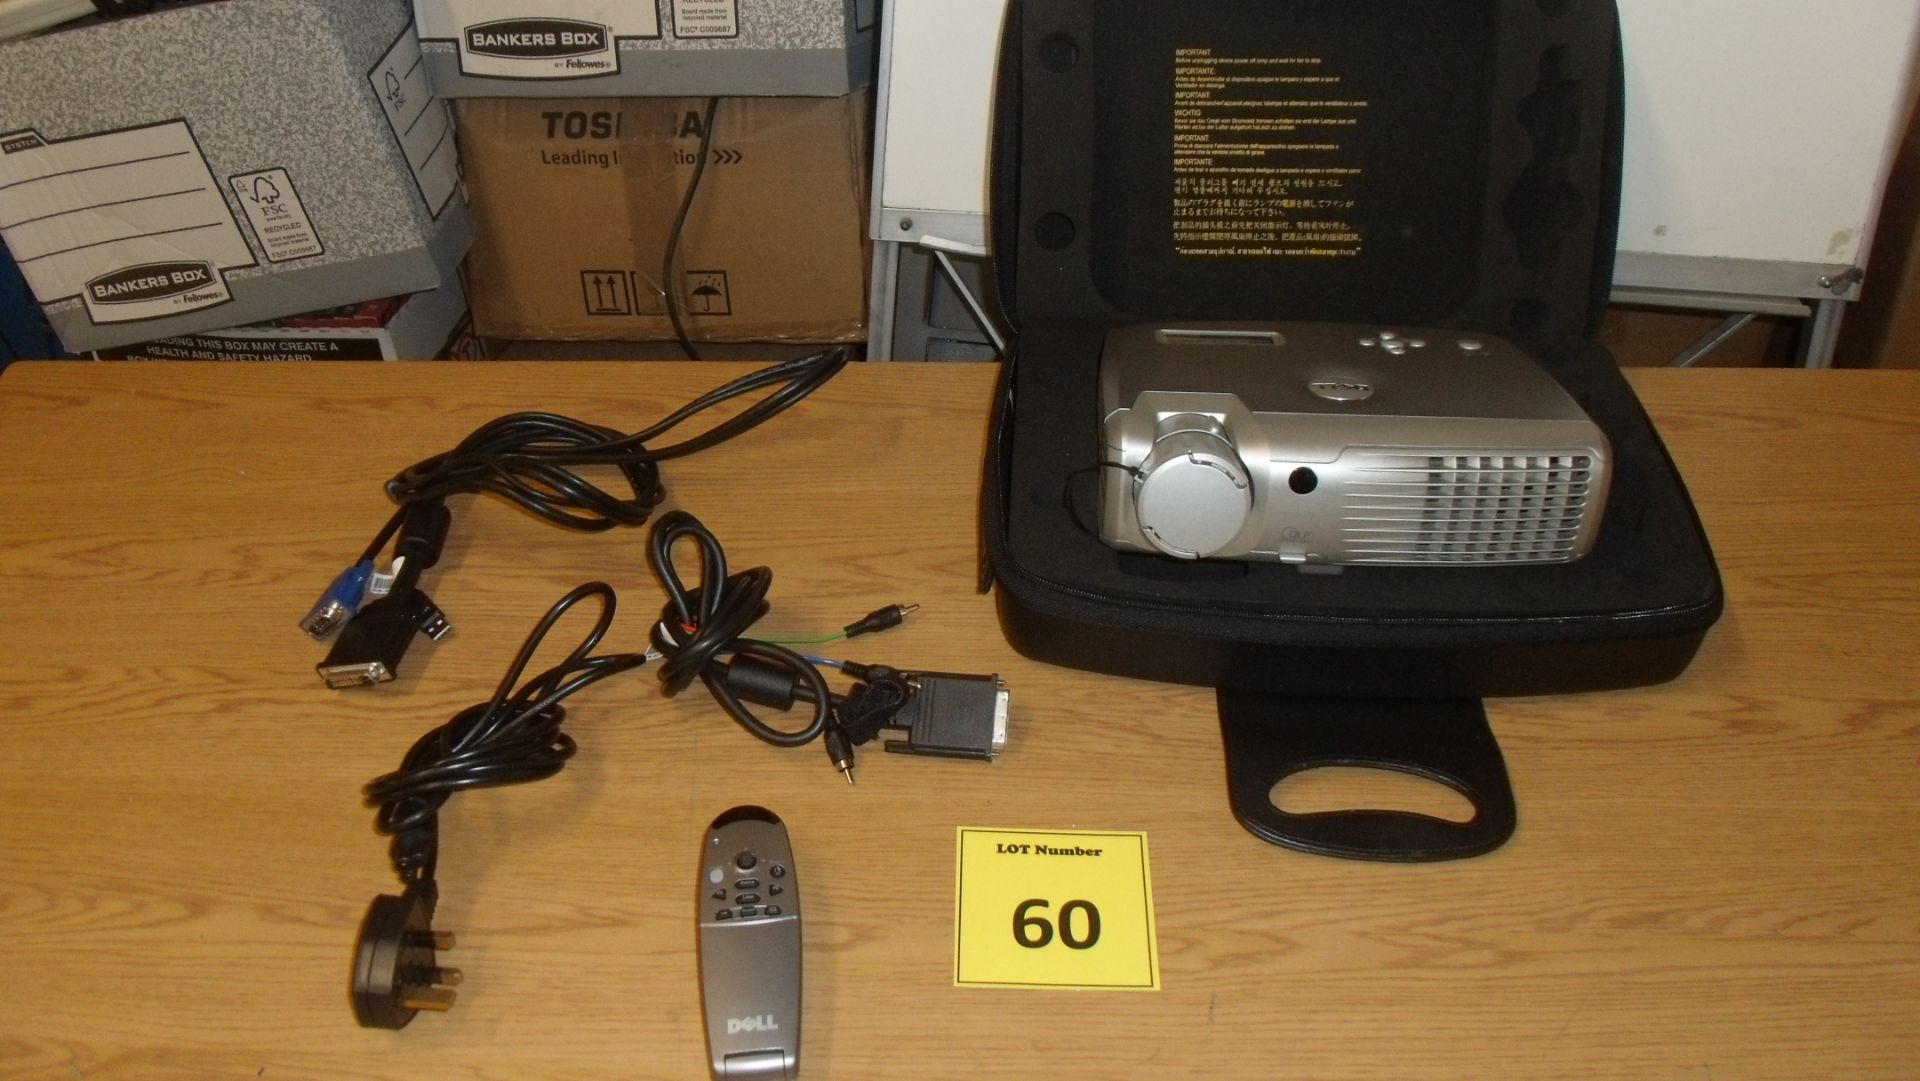 DELL 3300MP PROJECTOR IN ORIGINAL CARRY CASE WITH REMOTE CONTROL AND CABLES. BRIGHT CRISP PICTURE,